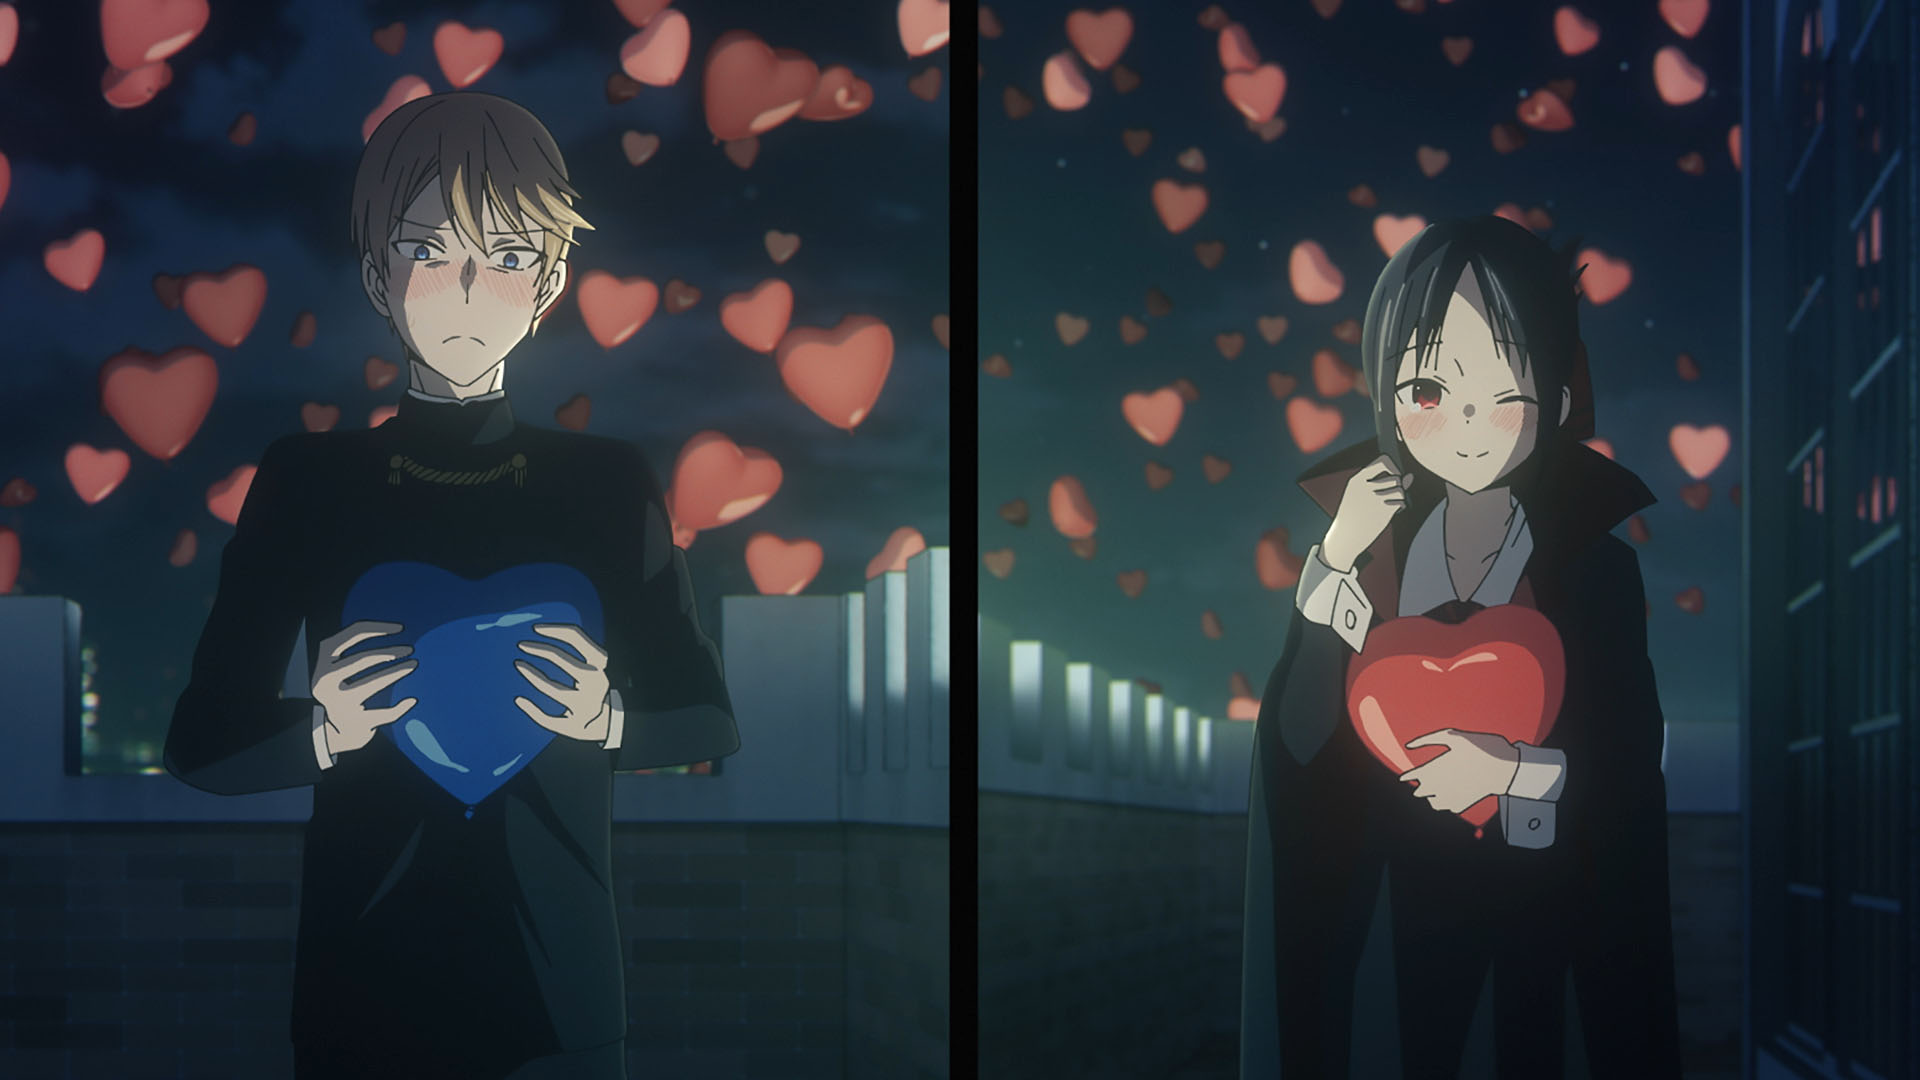 Kaguya-sama: Love is War -The First Kiss That Never Ends- Reveals Ending and Insert Song Artists